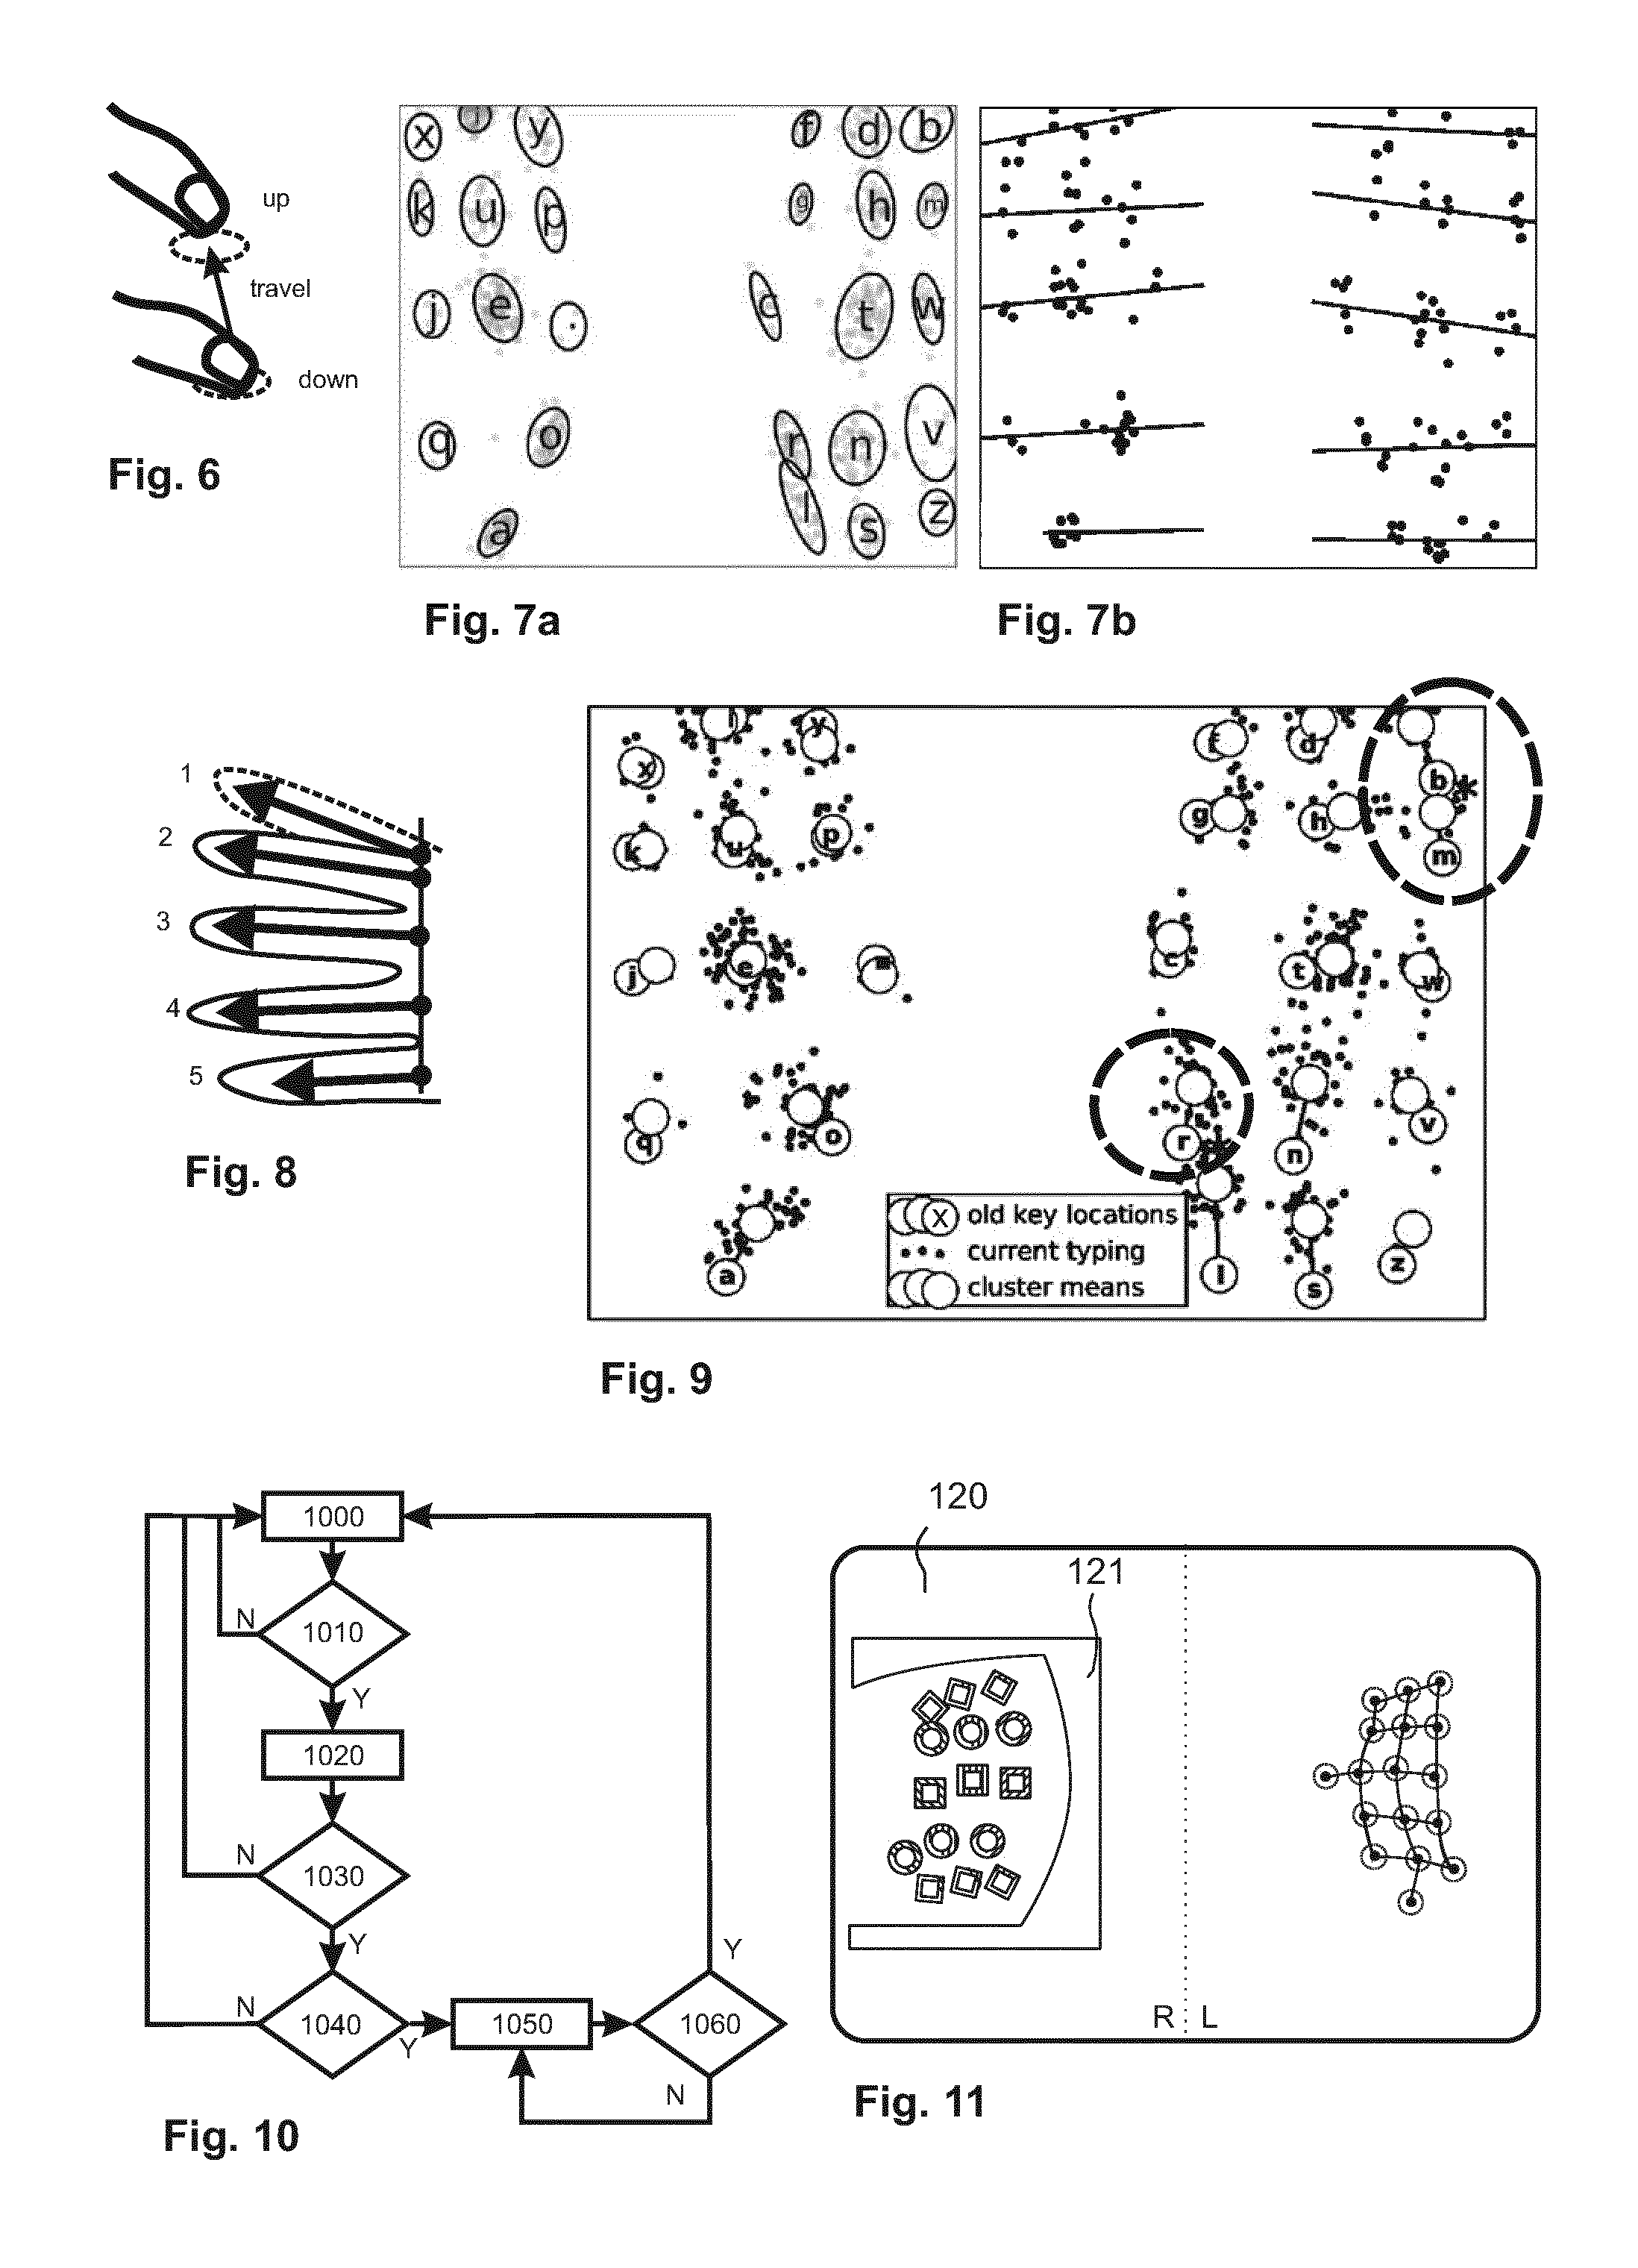 Method and Device for Typing on Mobile Computing Devices